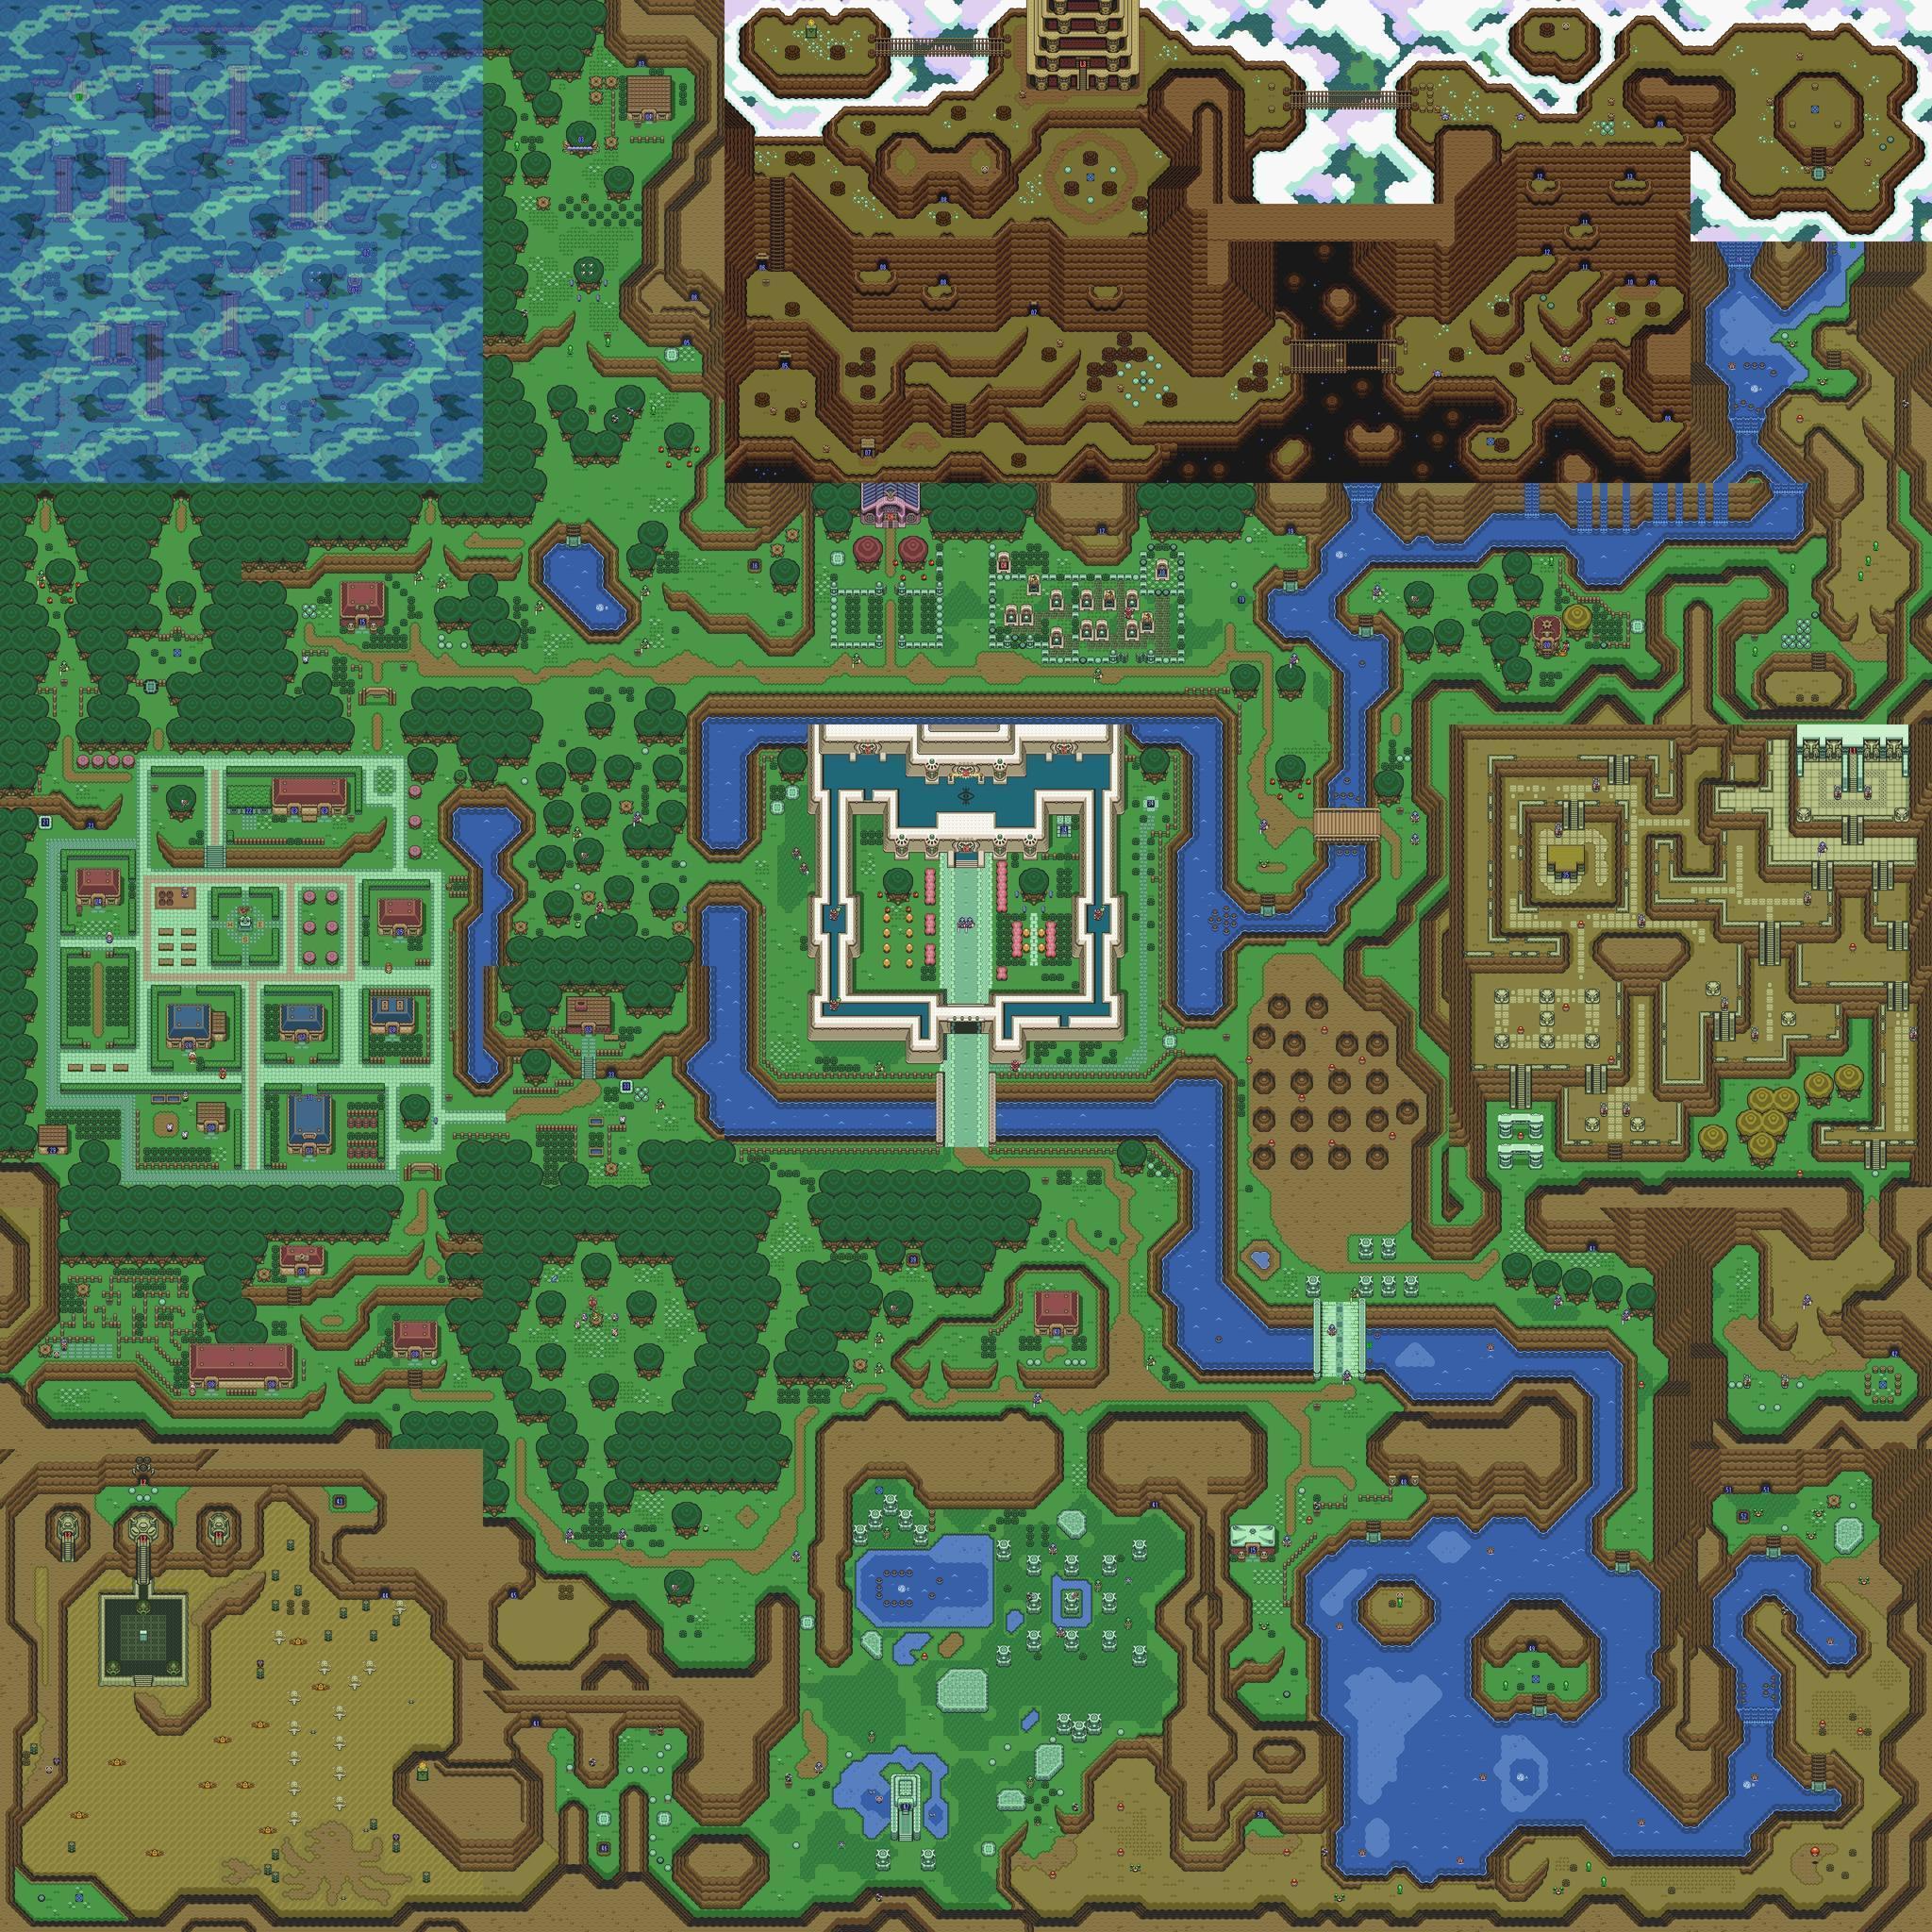 Zelda a Link to the Past